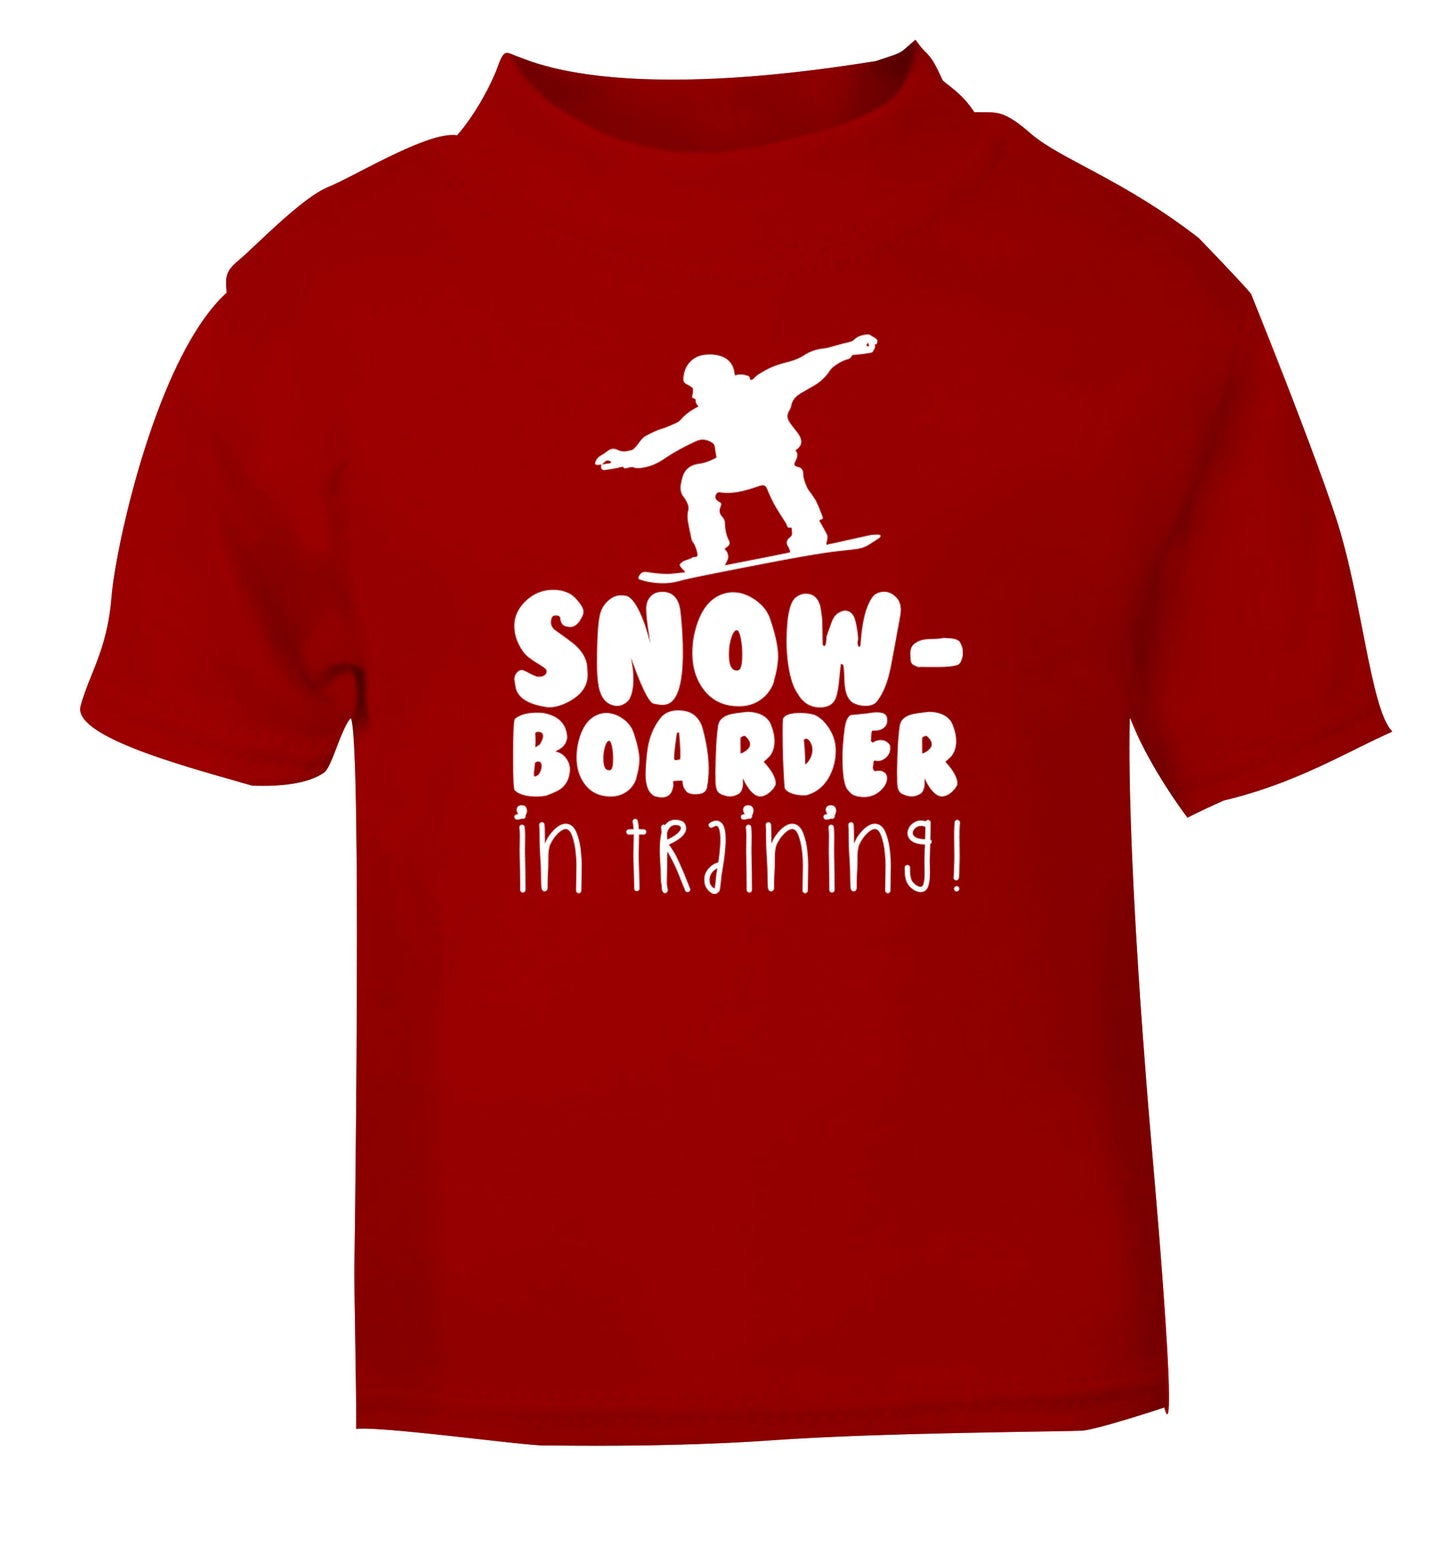 Snowboarder in training red Baby Toddler Tshirt 2 Years